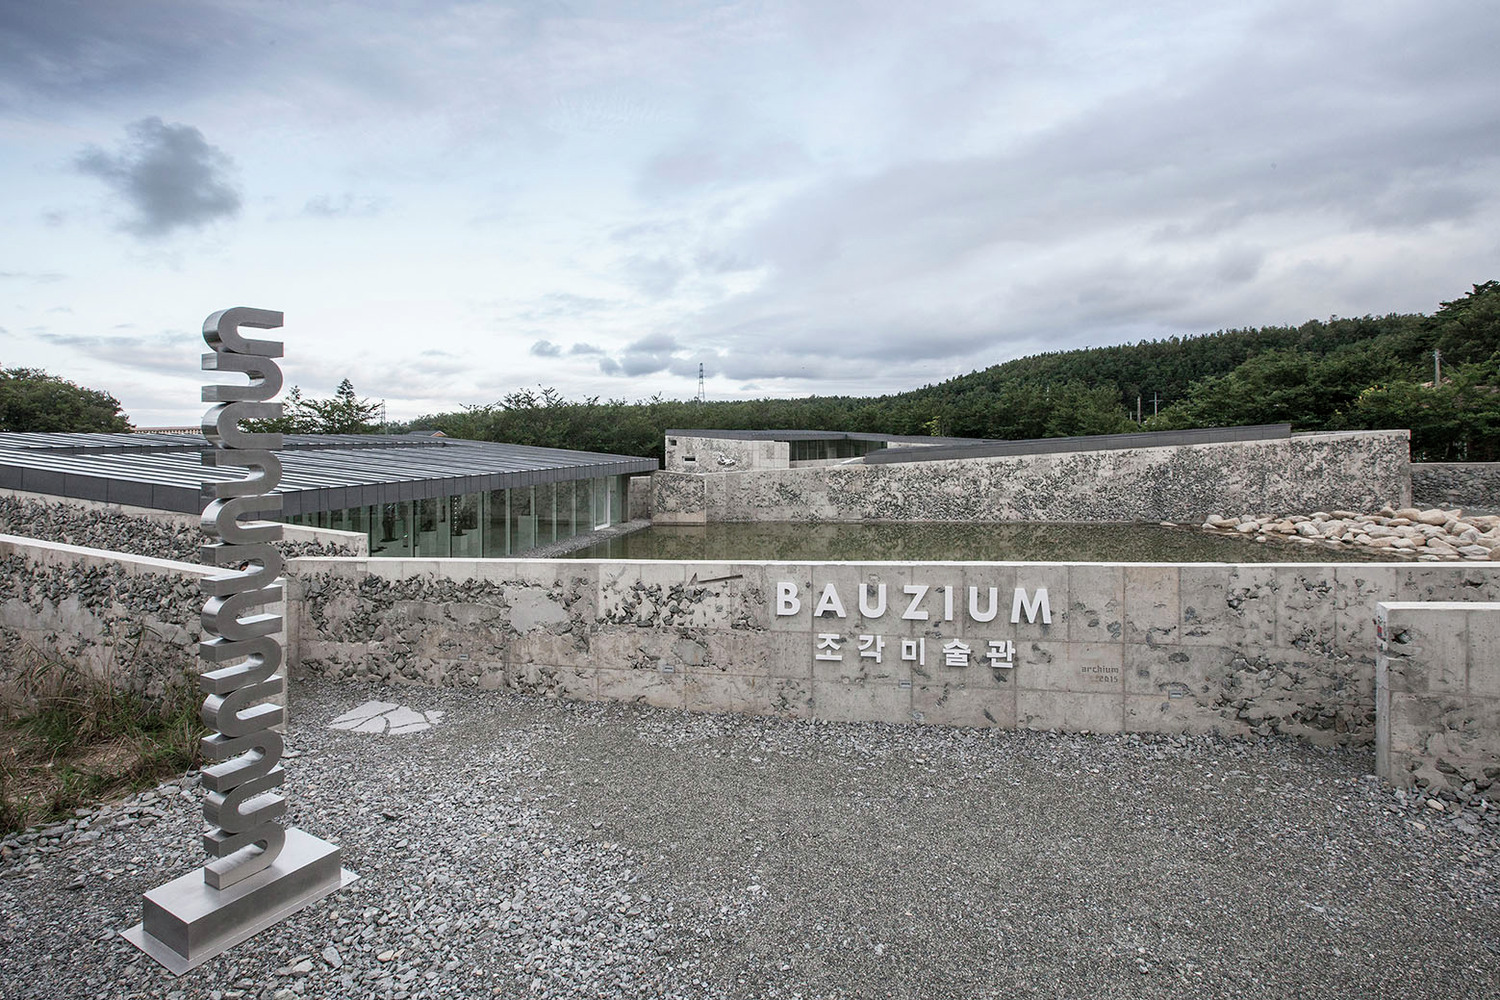 The entrance of Bauzium, the sculpture gallery belongs to the artist Kim Myoung-Sook